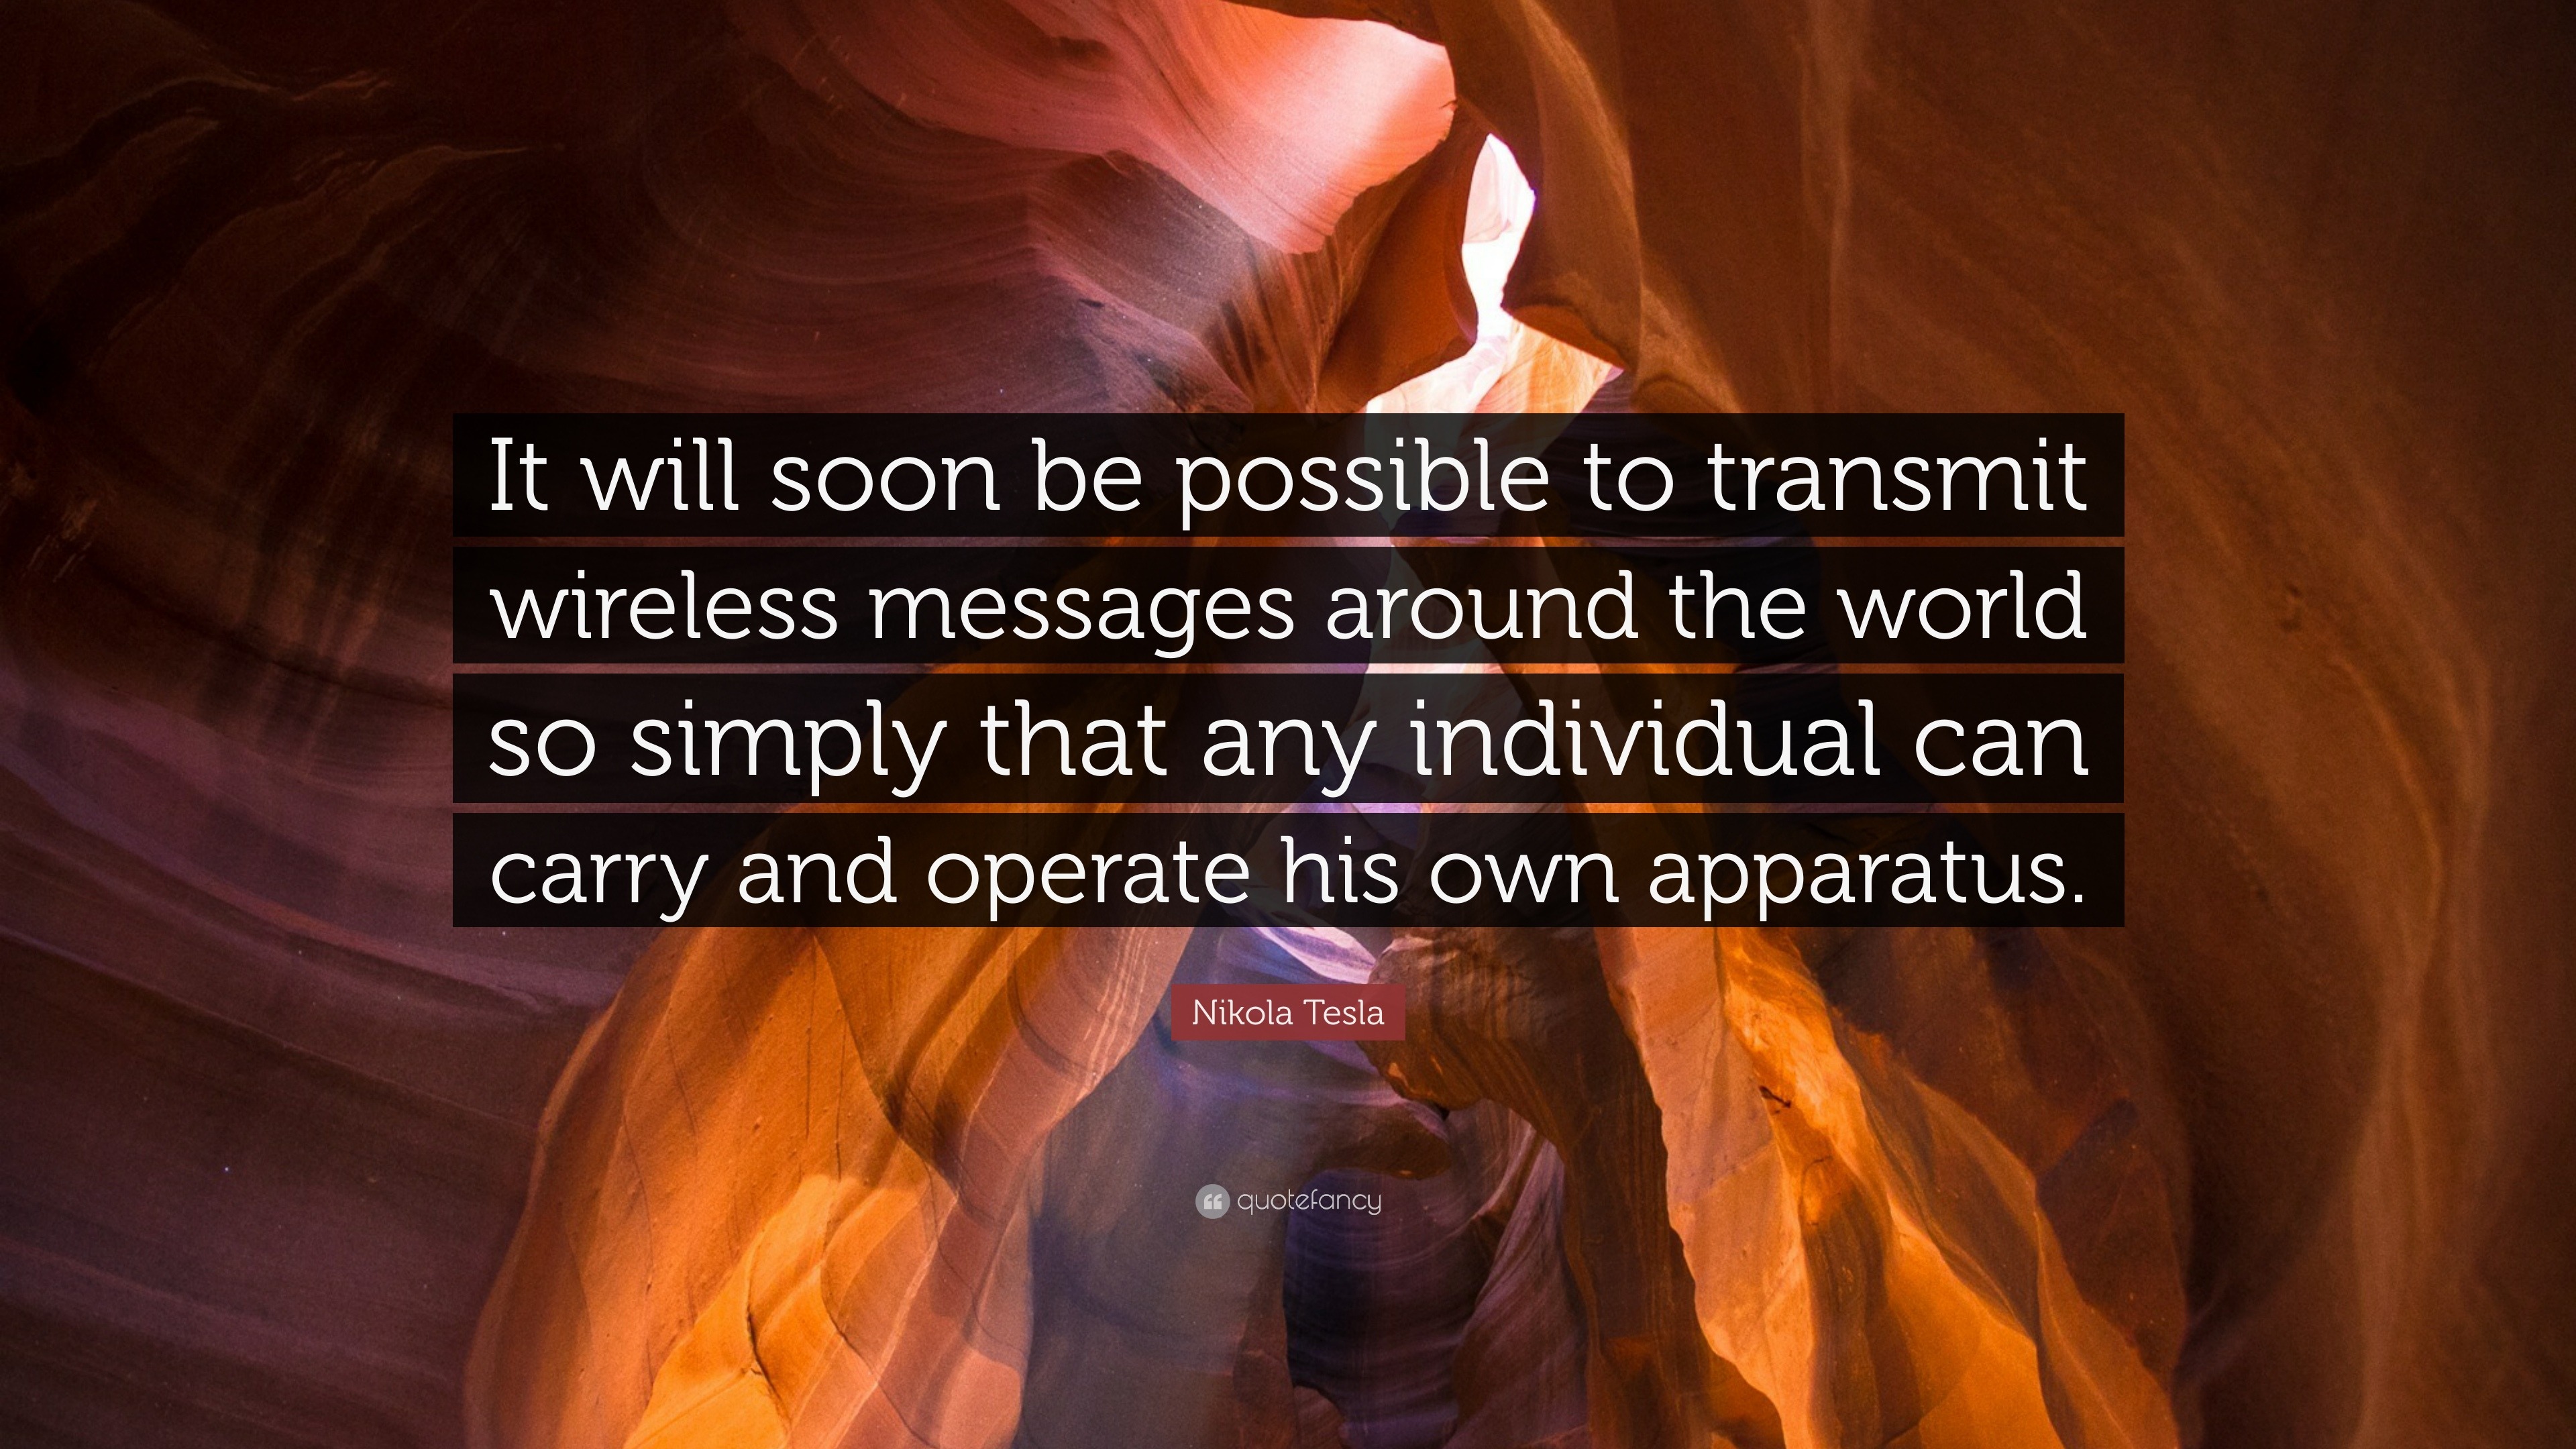 Nikola Tesla Quote: “It will soon be possible to transmit wireless messages  around the world so simply that any individual can carry and oper”